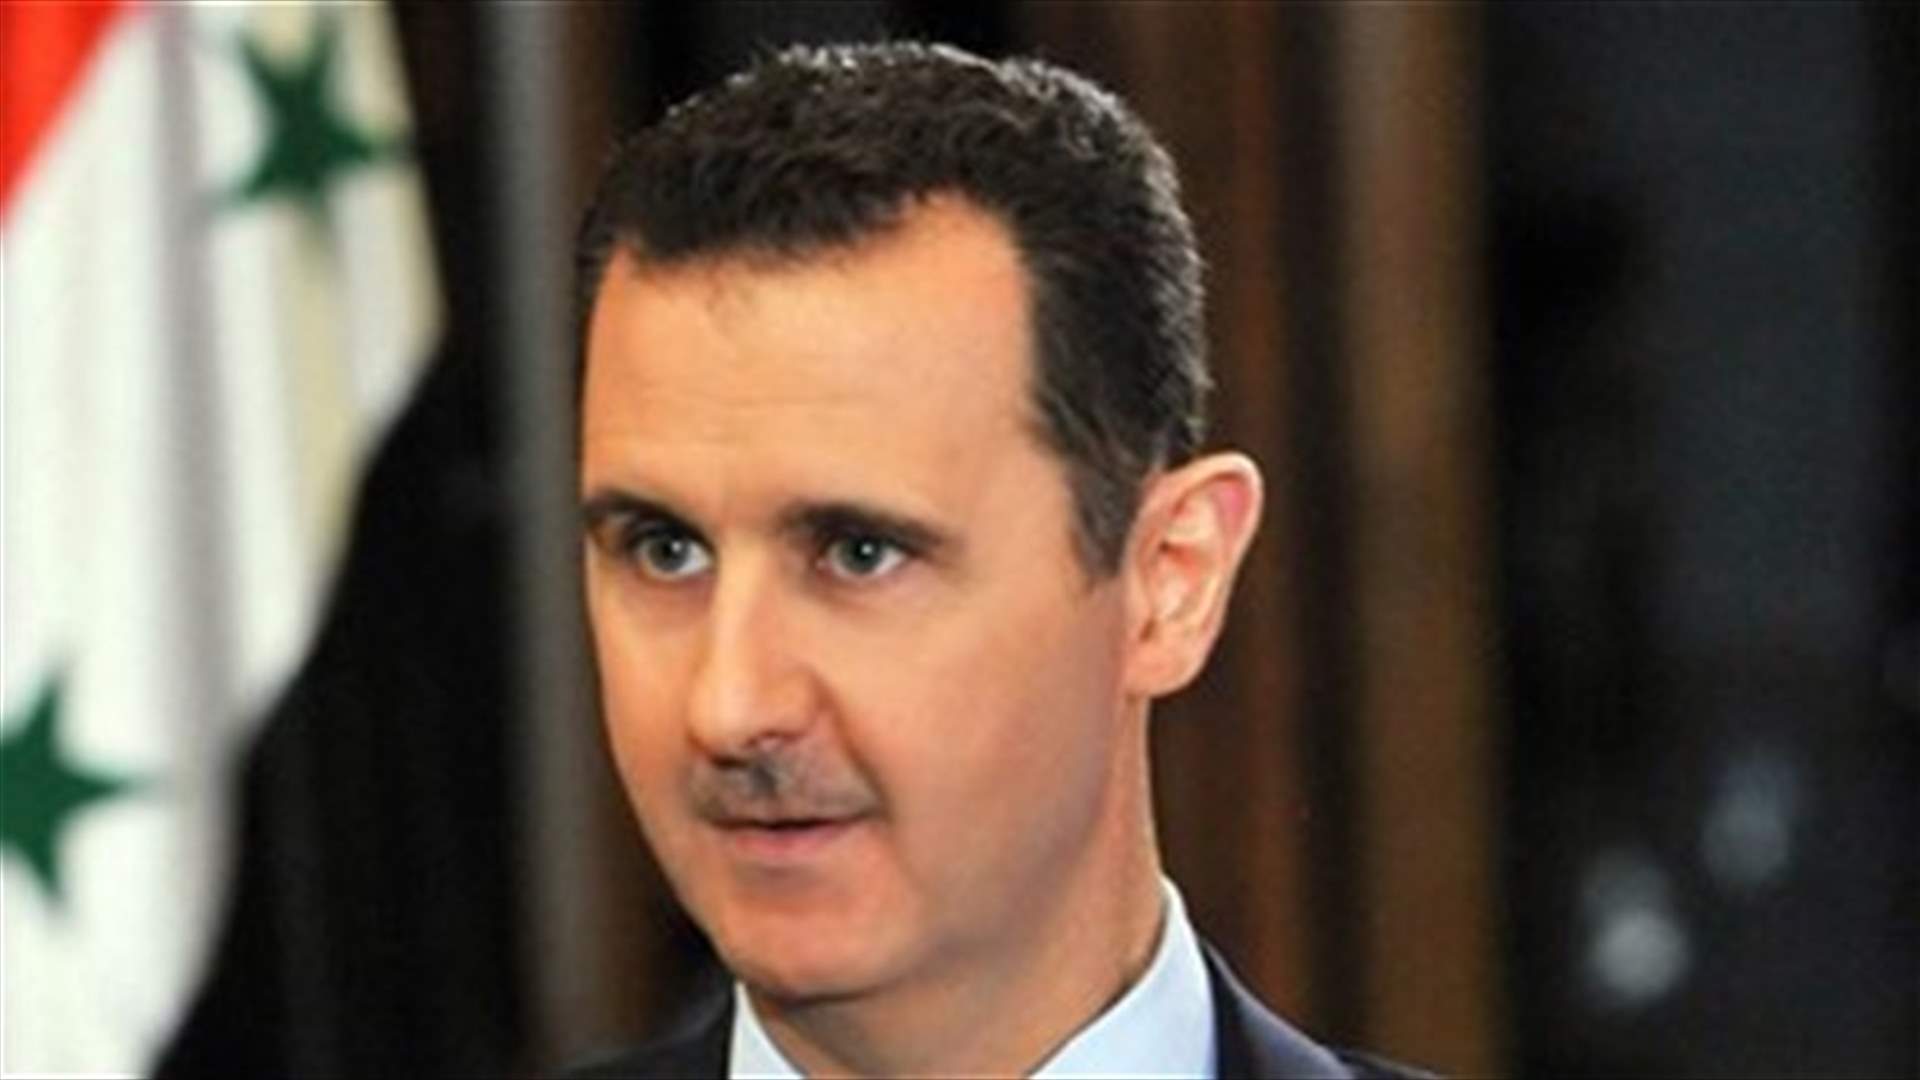 Syria&#39;s Assad sees Trump&#39;s Islamic State view as promising